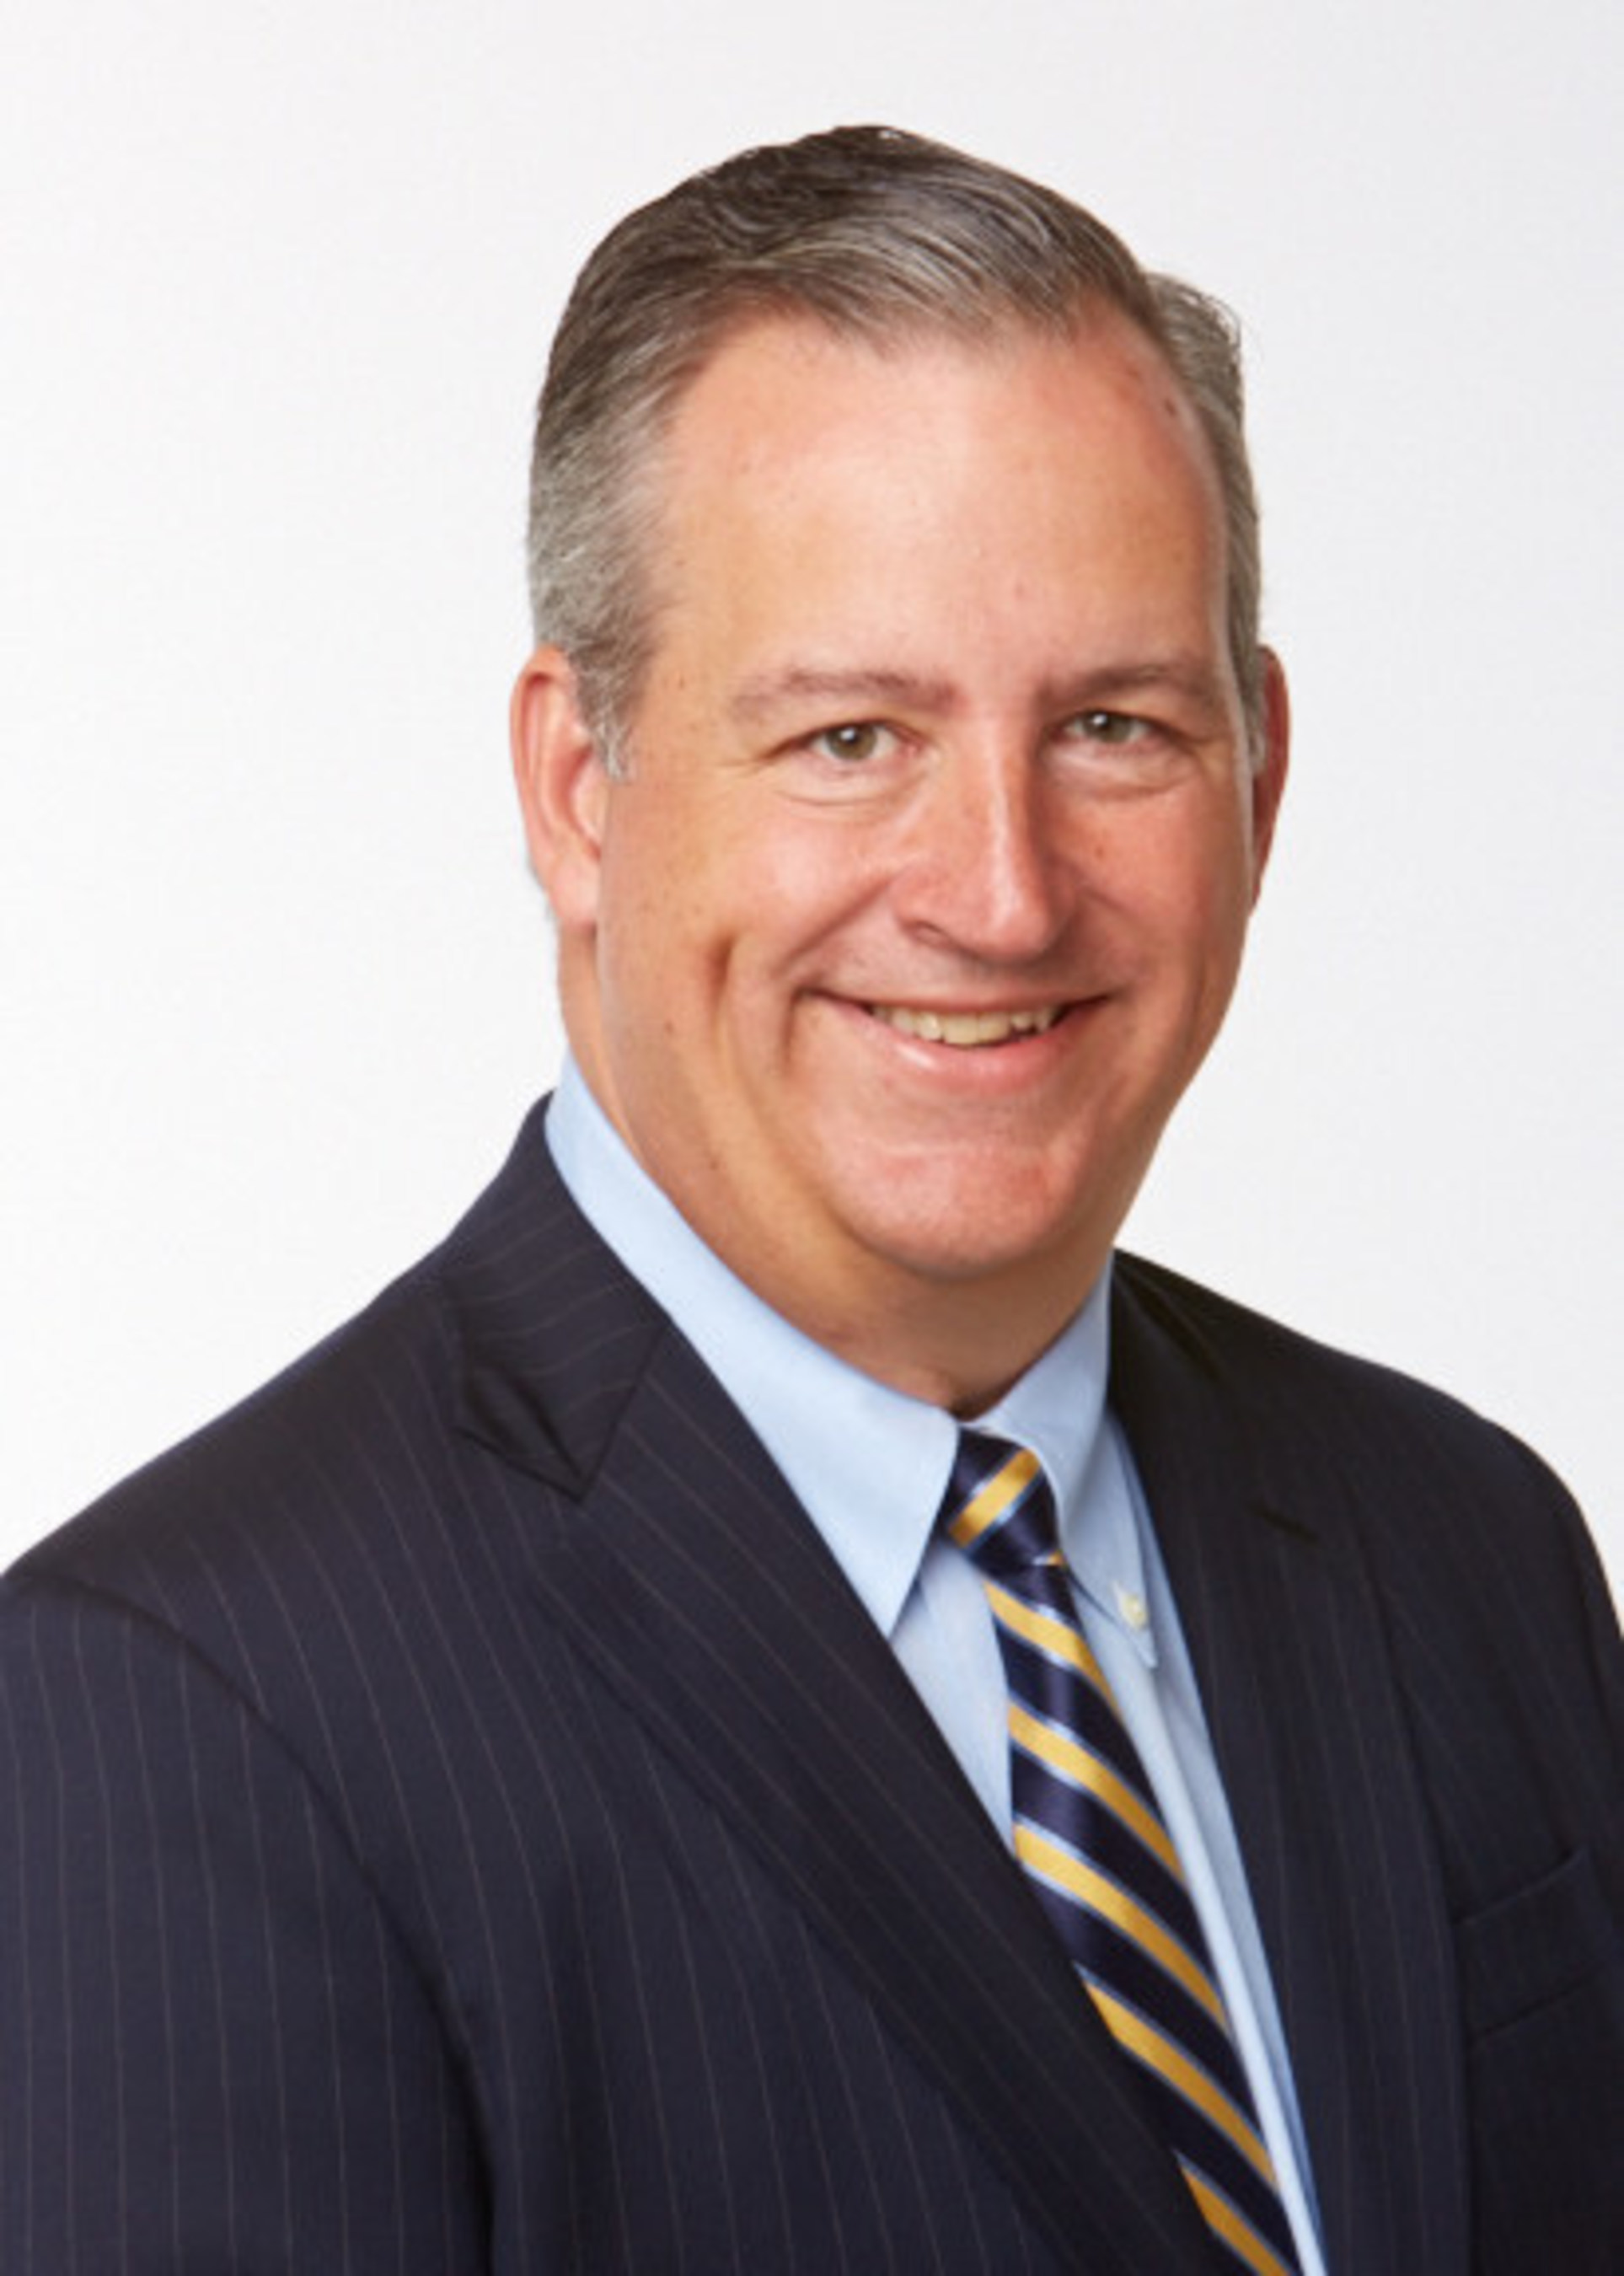 Tom Harty, Meredith President and Chief Operating Officer